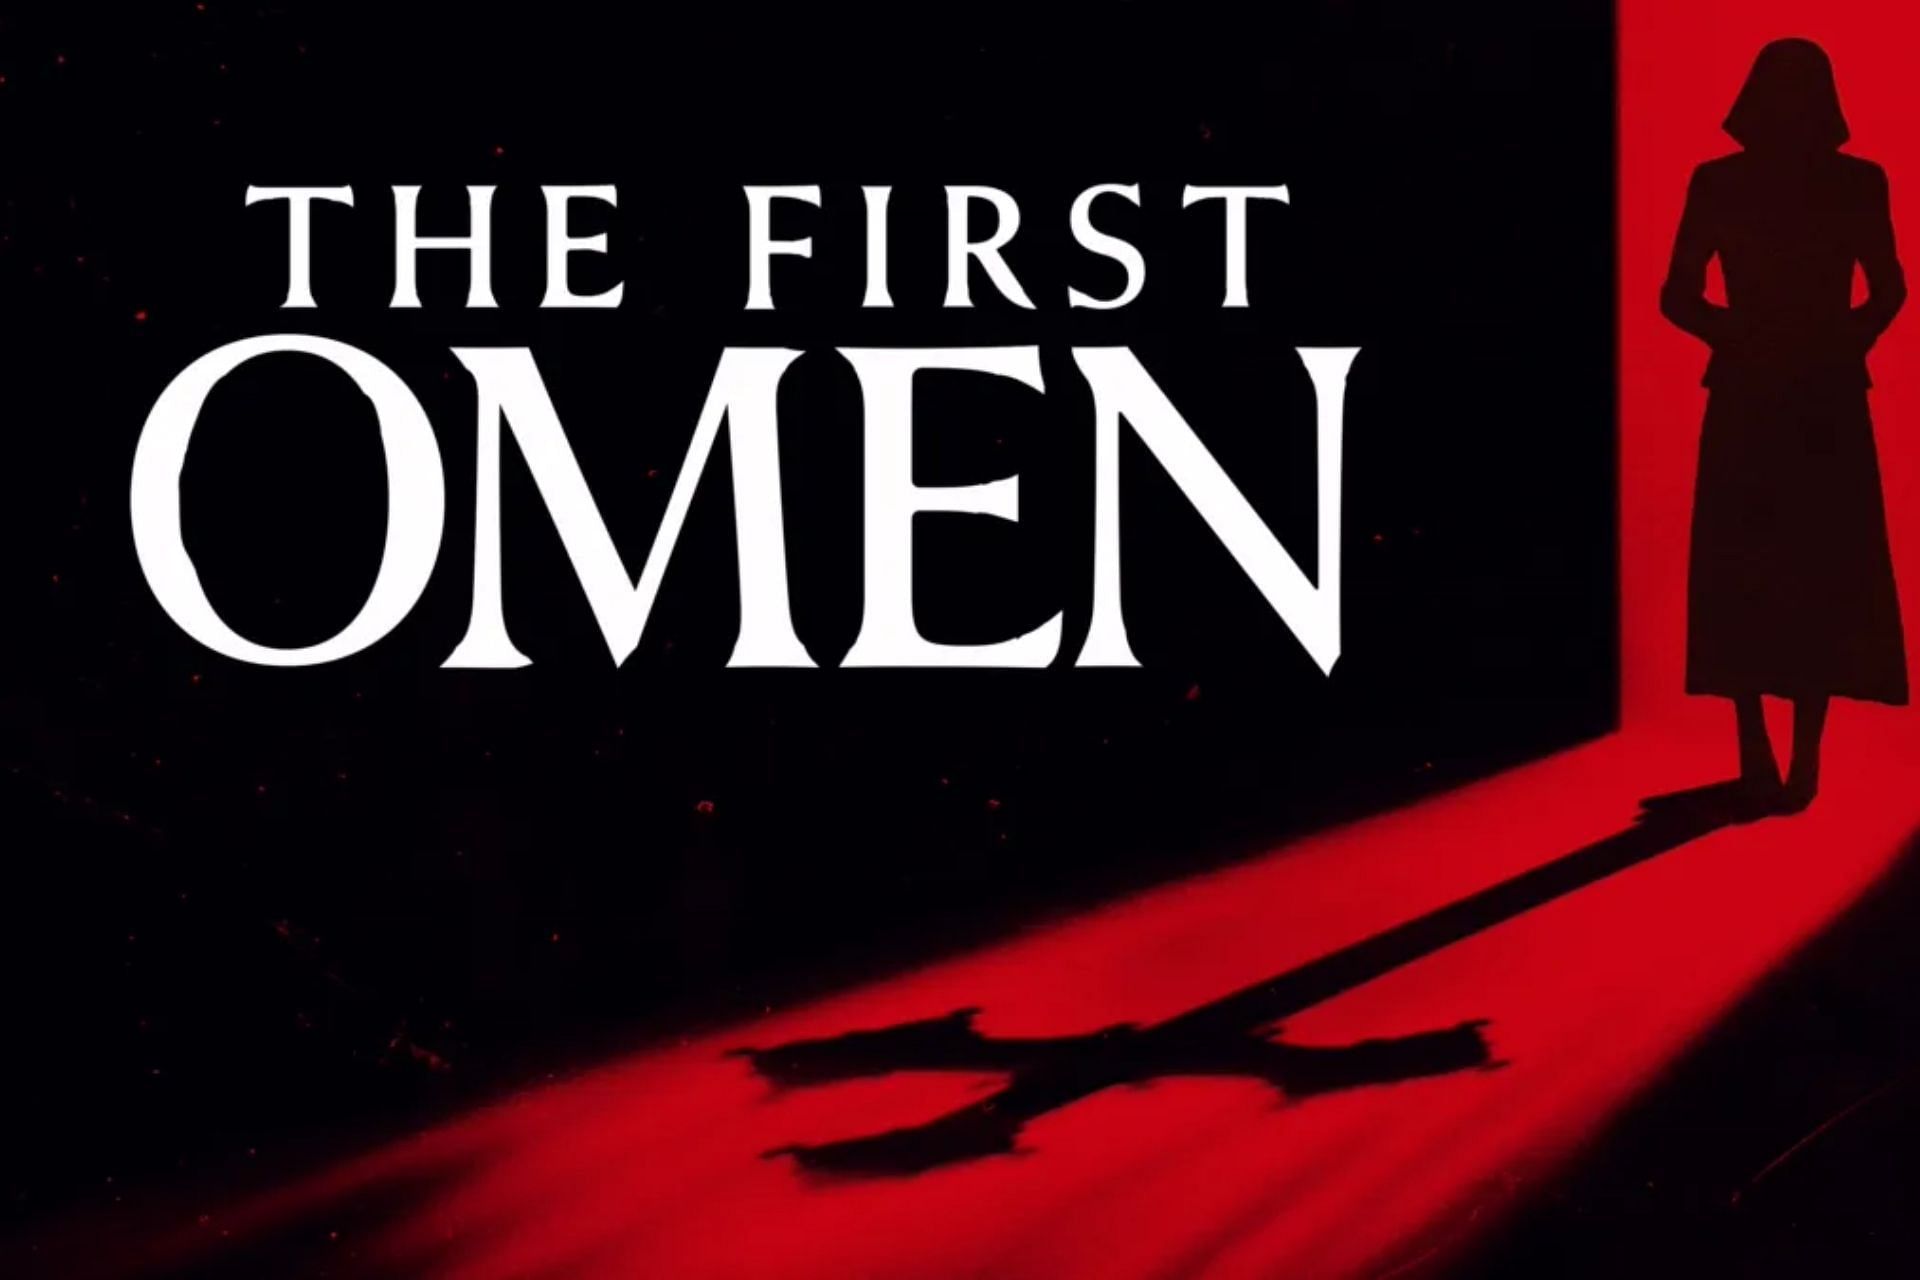 The First Omen is the 6th movie in The Omen franchise. (Disney+)